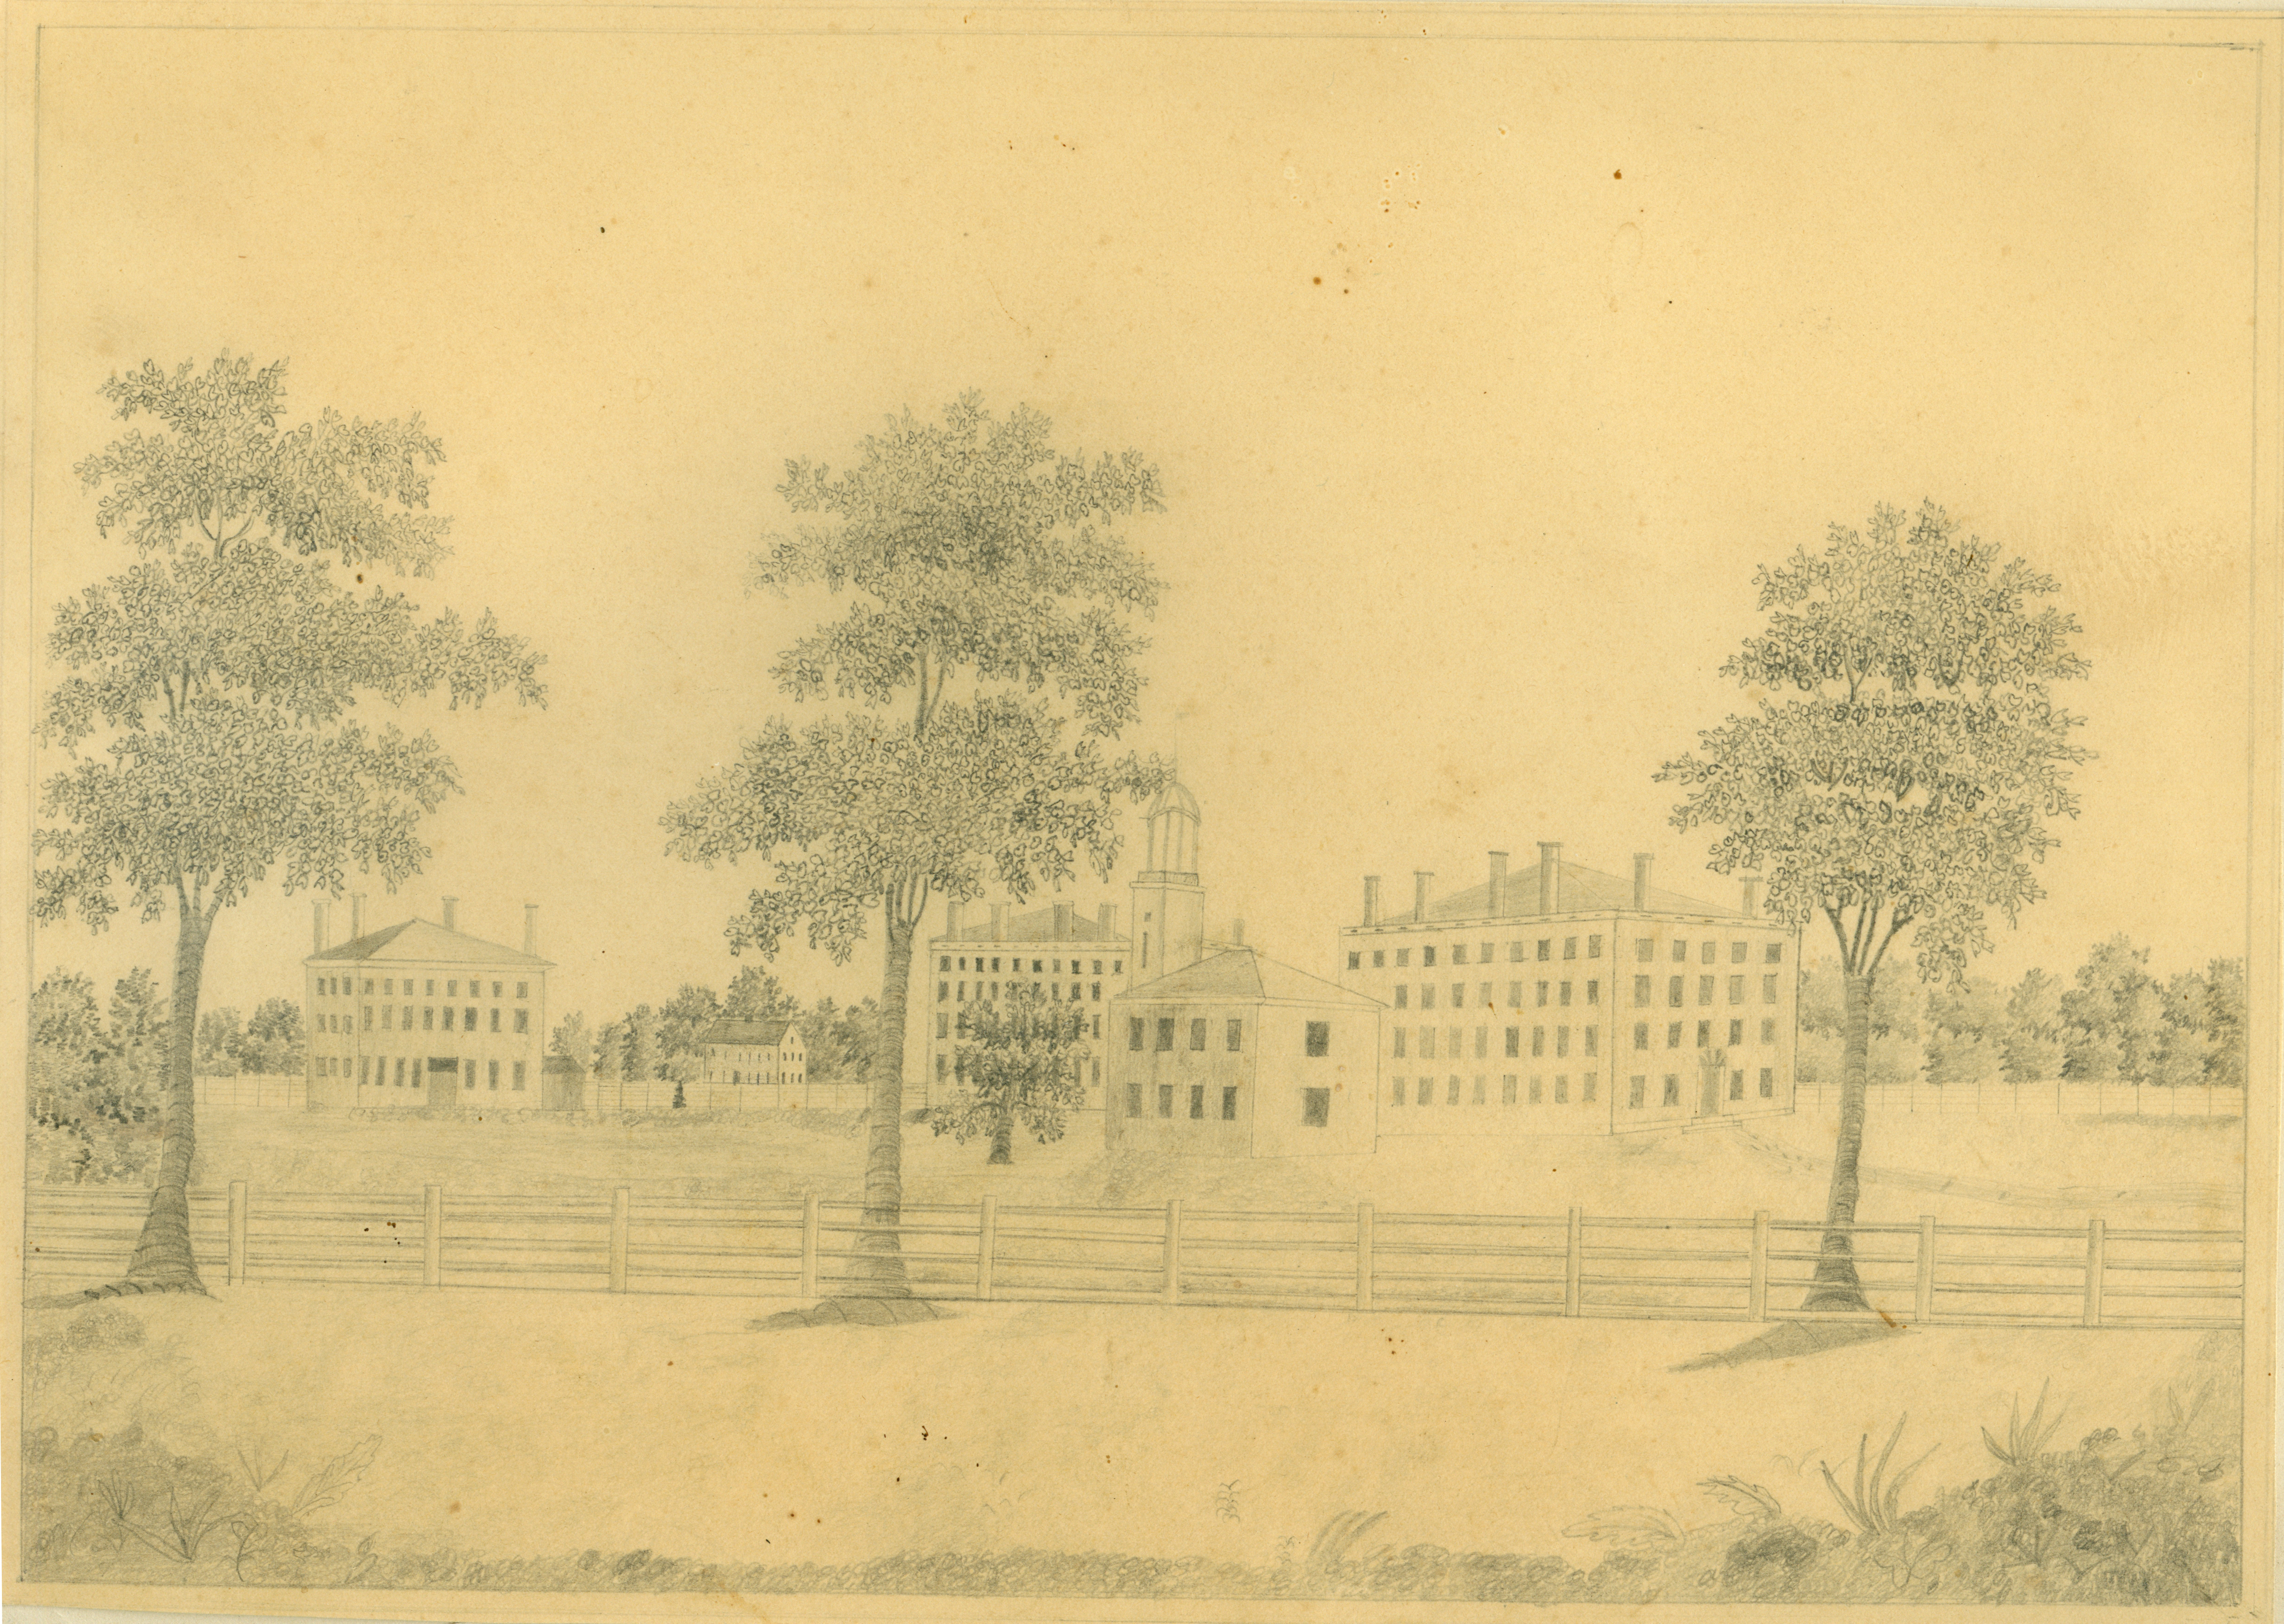 Bowdoin's campus in the 1830s